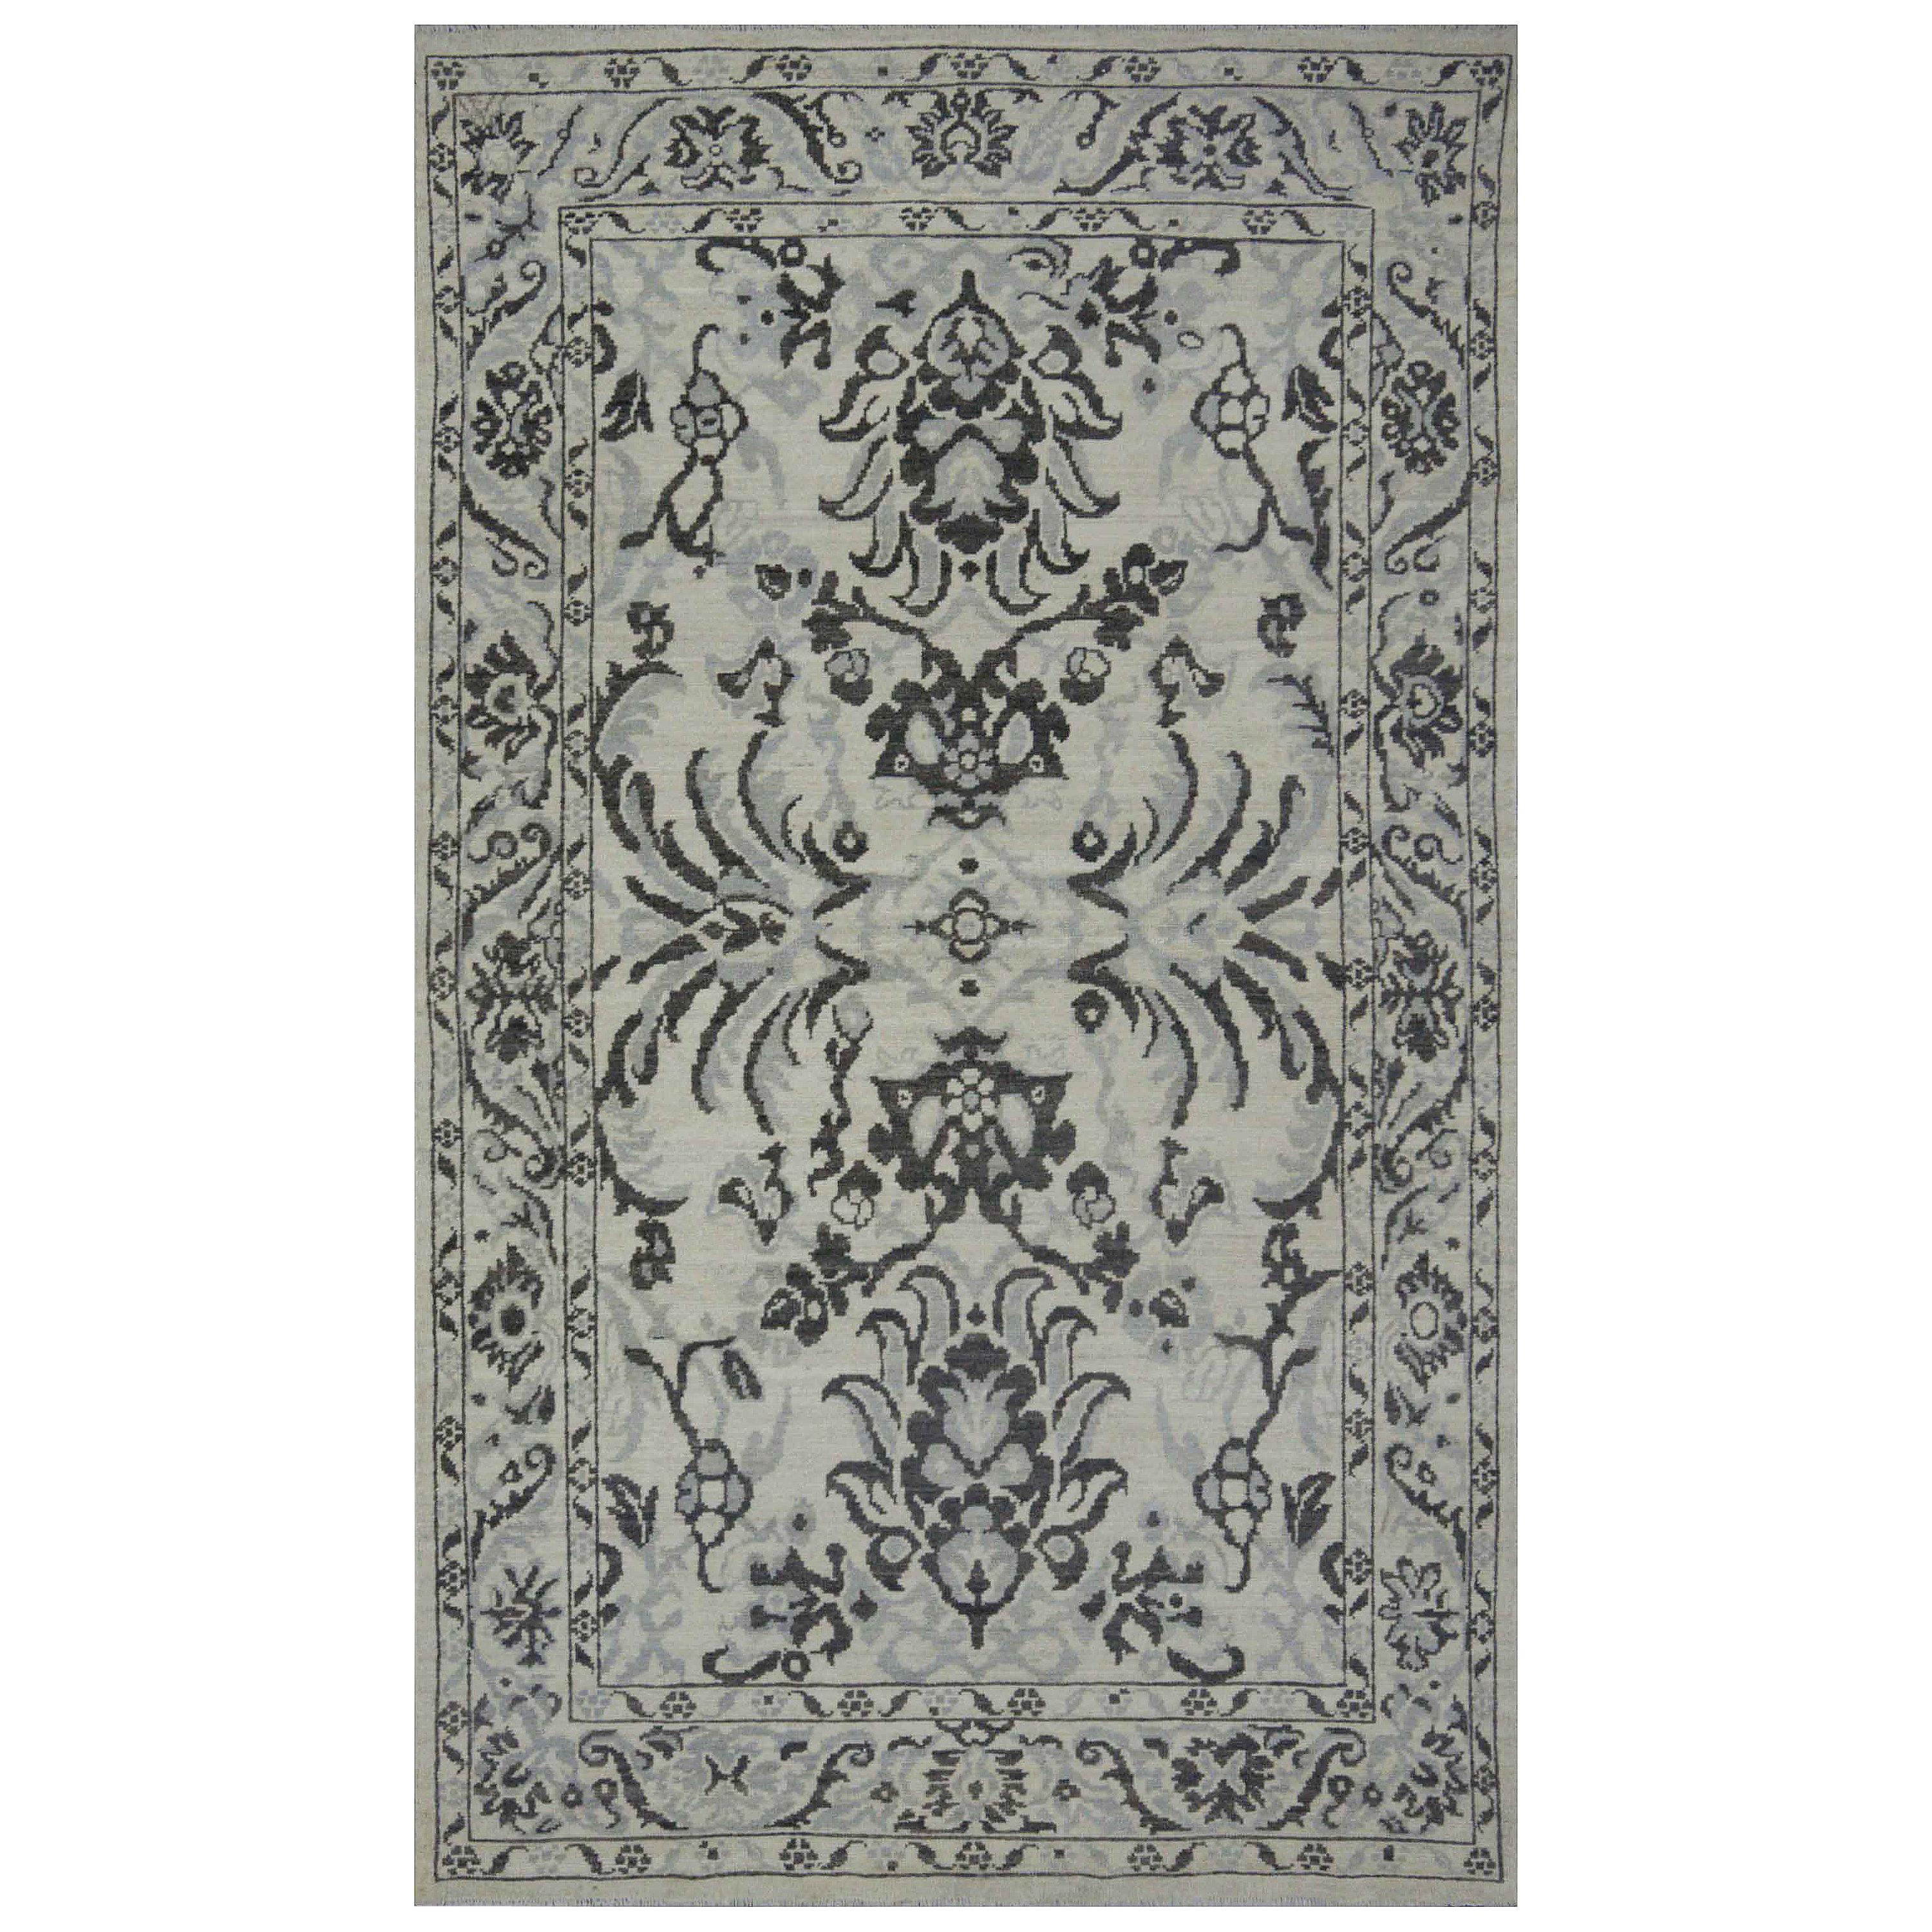 Contemporary Sultanabad Rug of Turkish Origin with Black & Gray Floral Details For Sale